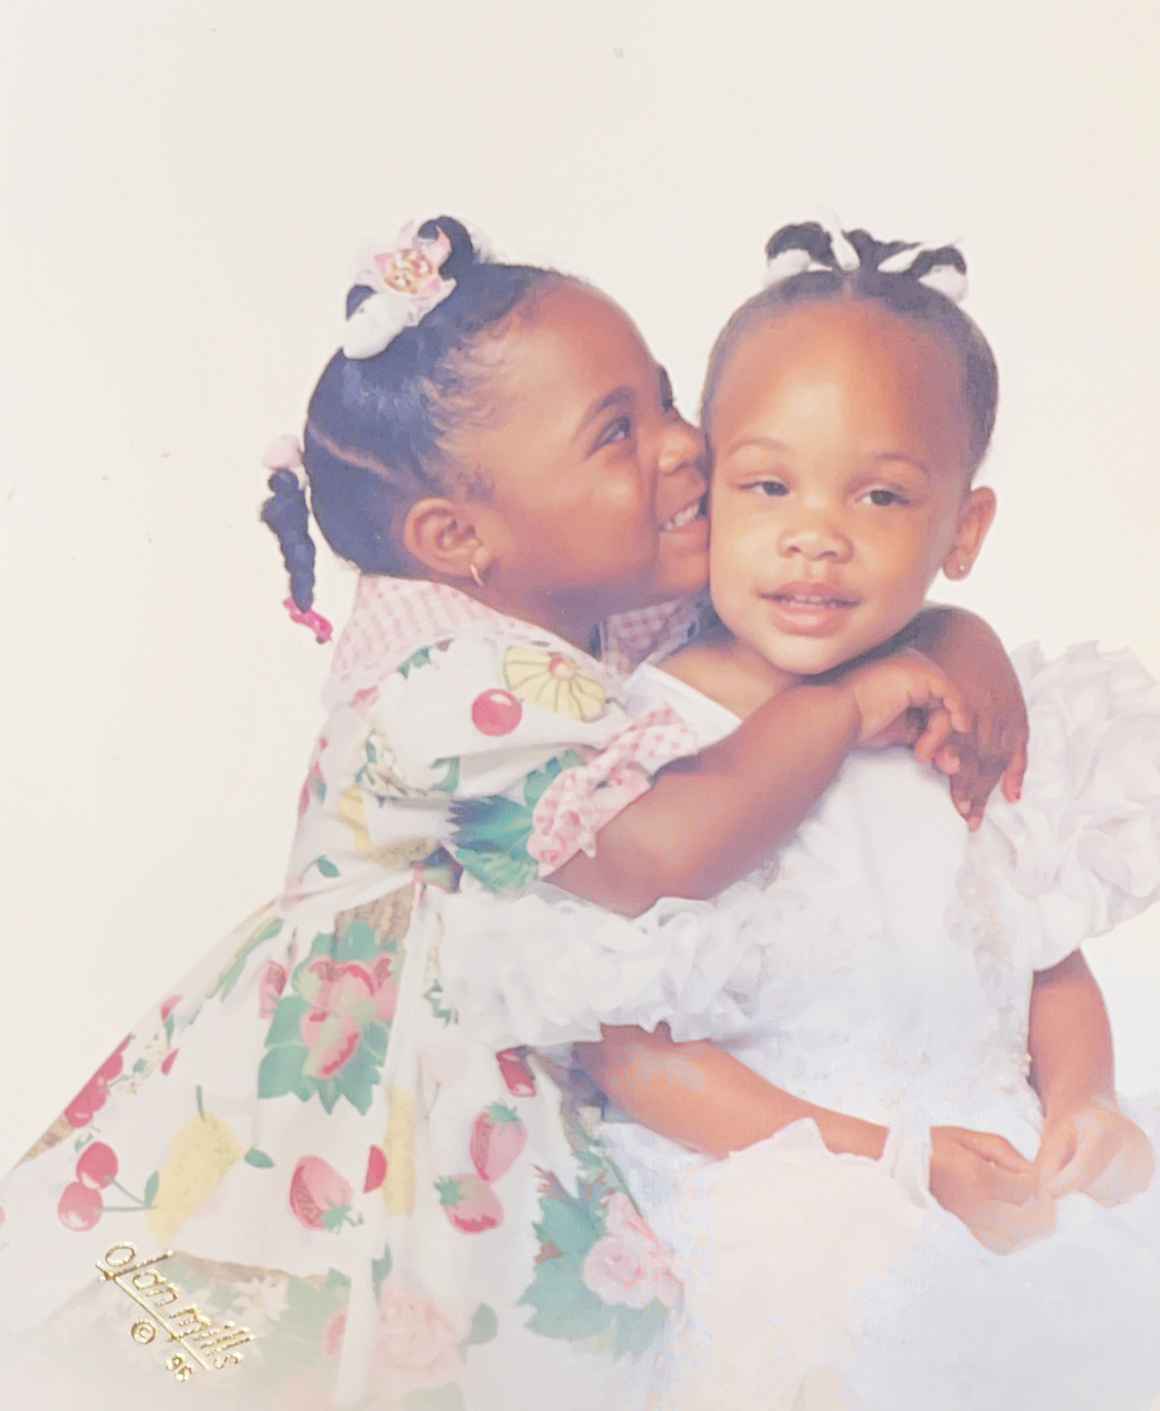 Antoinette and Alicia are sisters. They are young children in this photo of them hugging.They were at a very 90’s Olan Mills photoshoot.